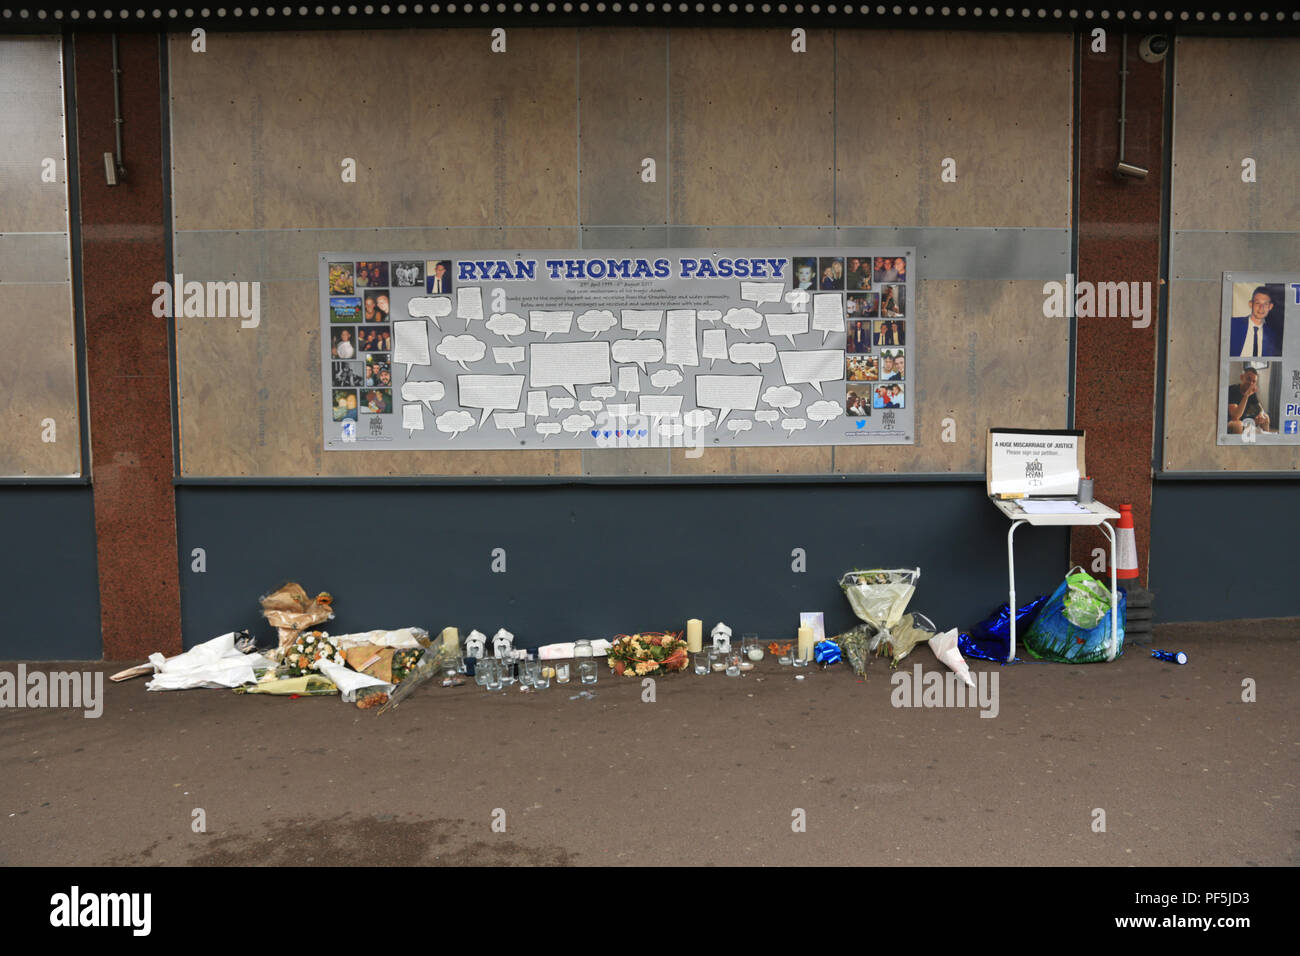 Tributes and messages of support for the justice for Ryan Passey campaign in Stourbridge, West midlands, UK. Stock Photo